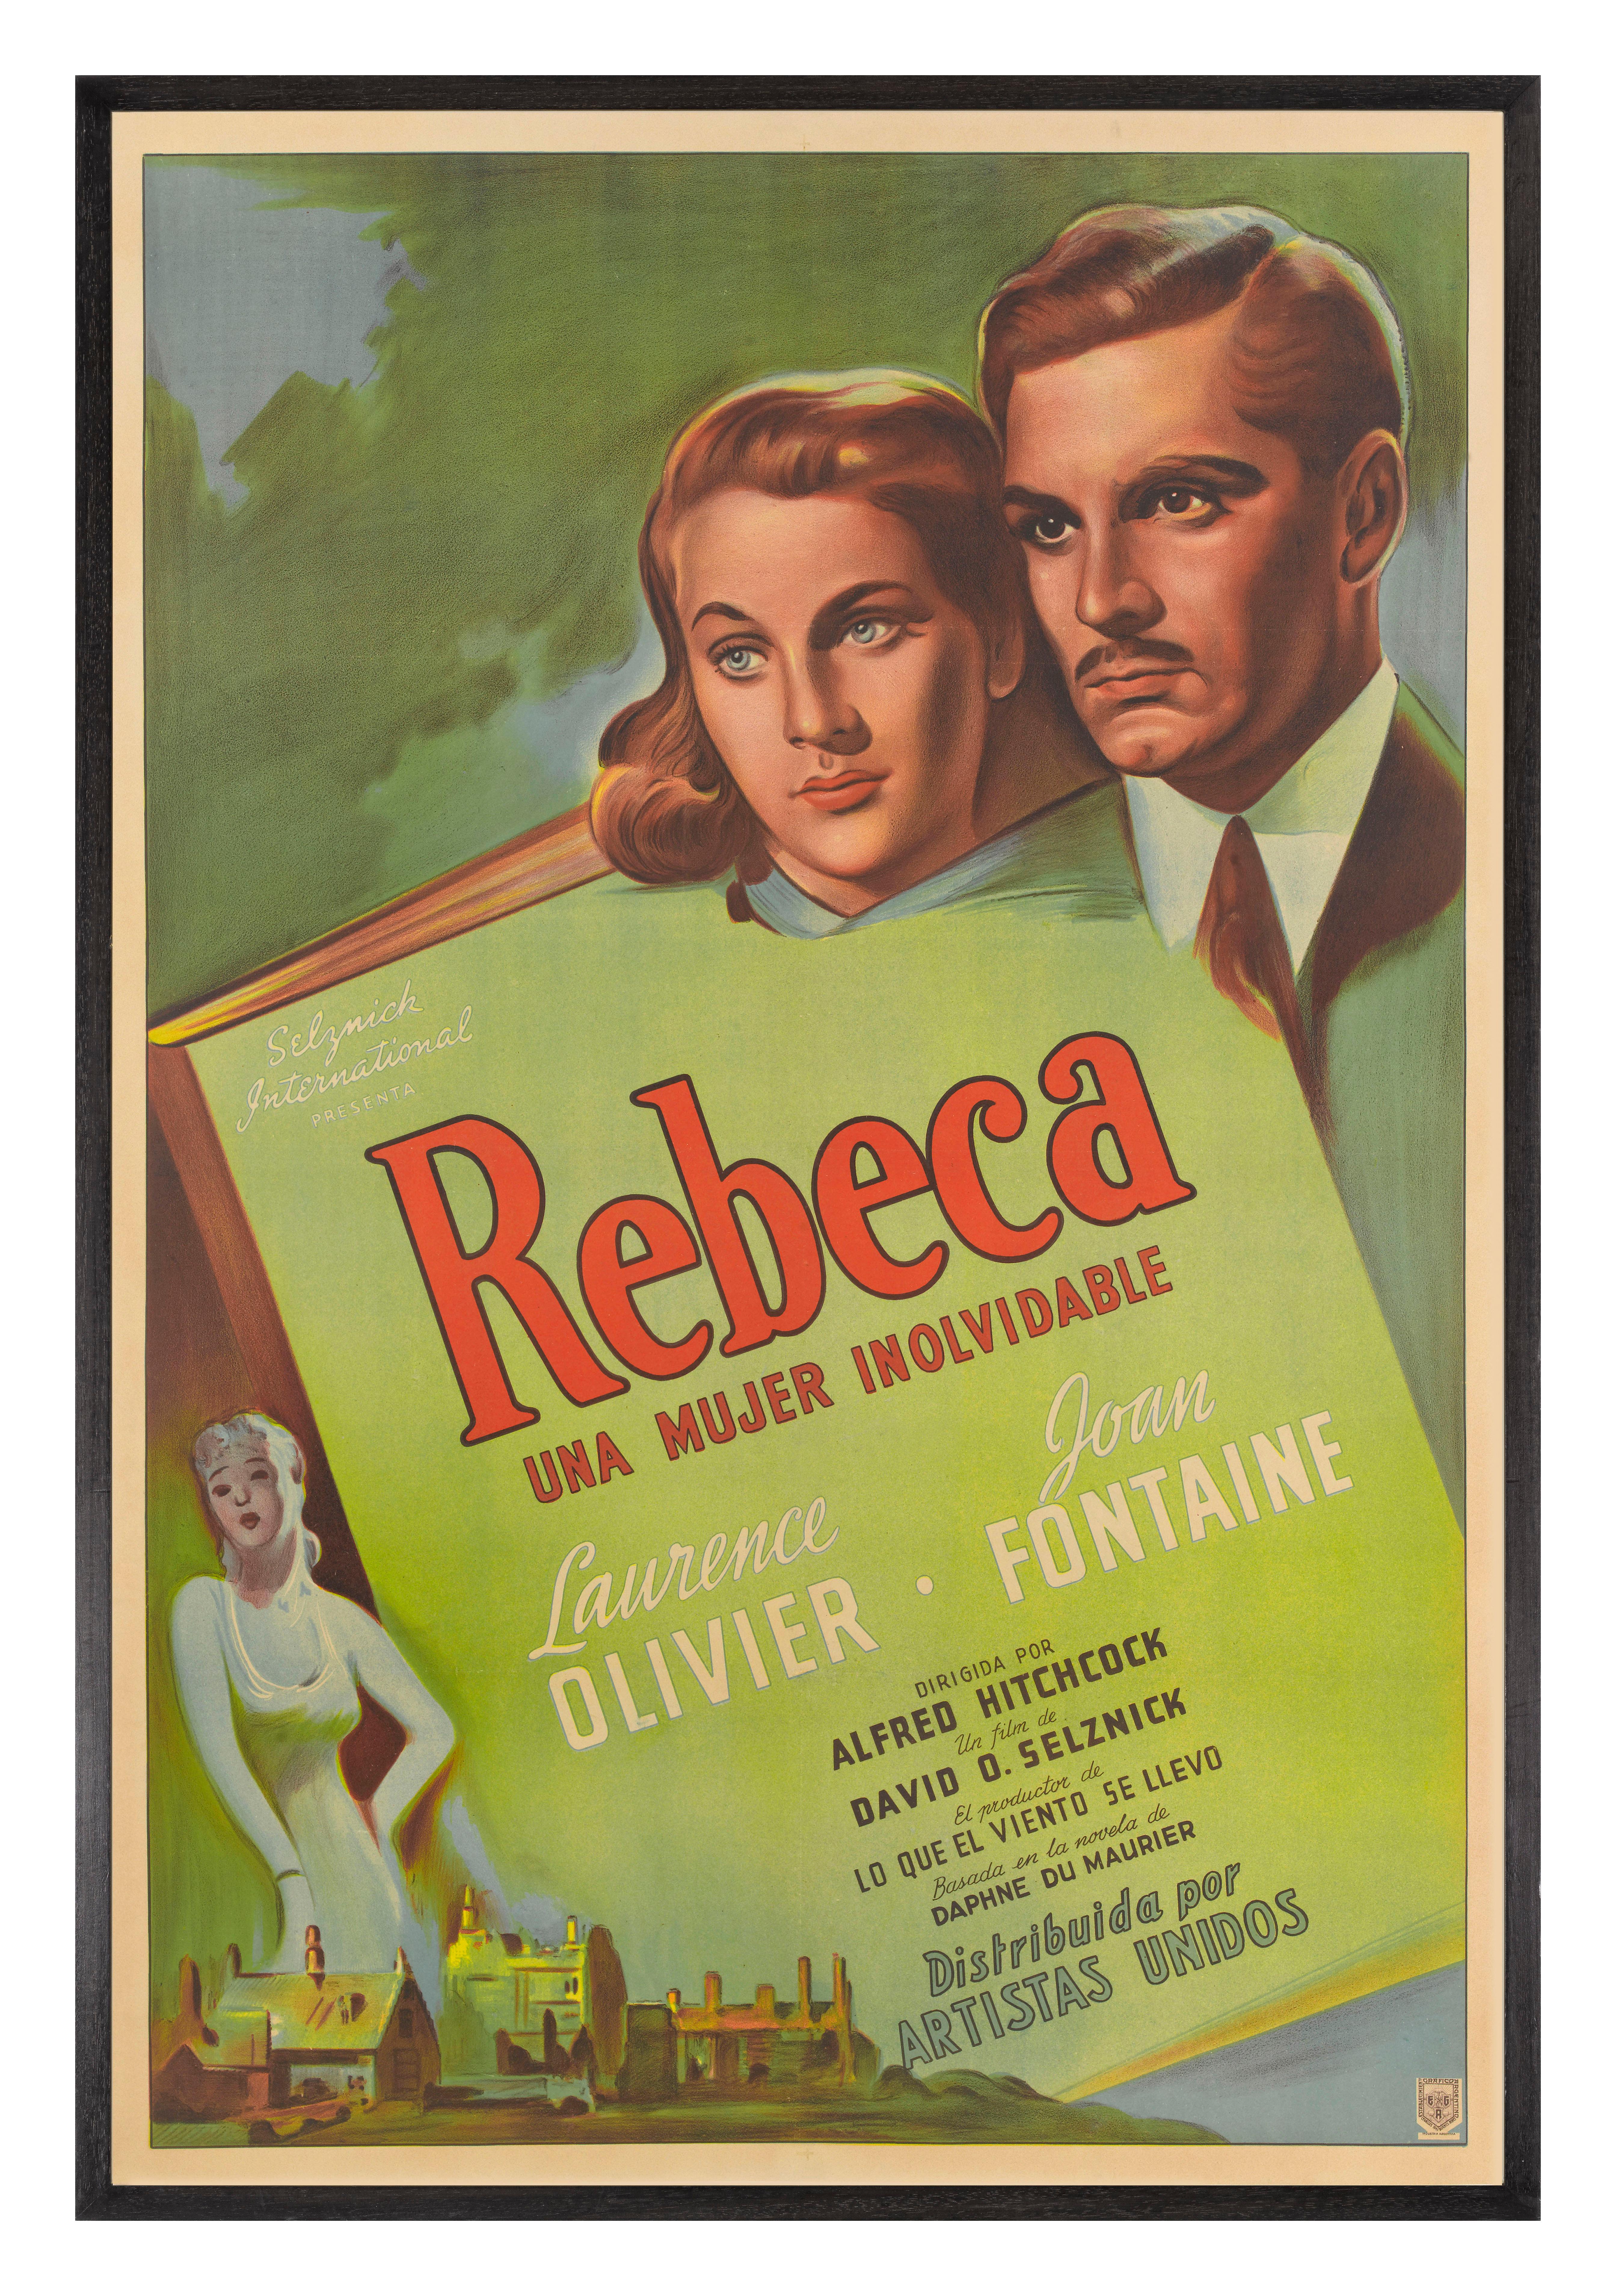 Original Argentinean film poster from (1940) 43 x 29 in. (109 x 74 cm)
This poster would have been used outside the cinema at the films original release.
This psychological drama-thriller was directed by Alfred Hitchcock, it was the first film he